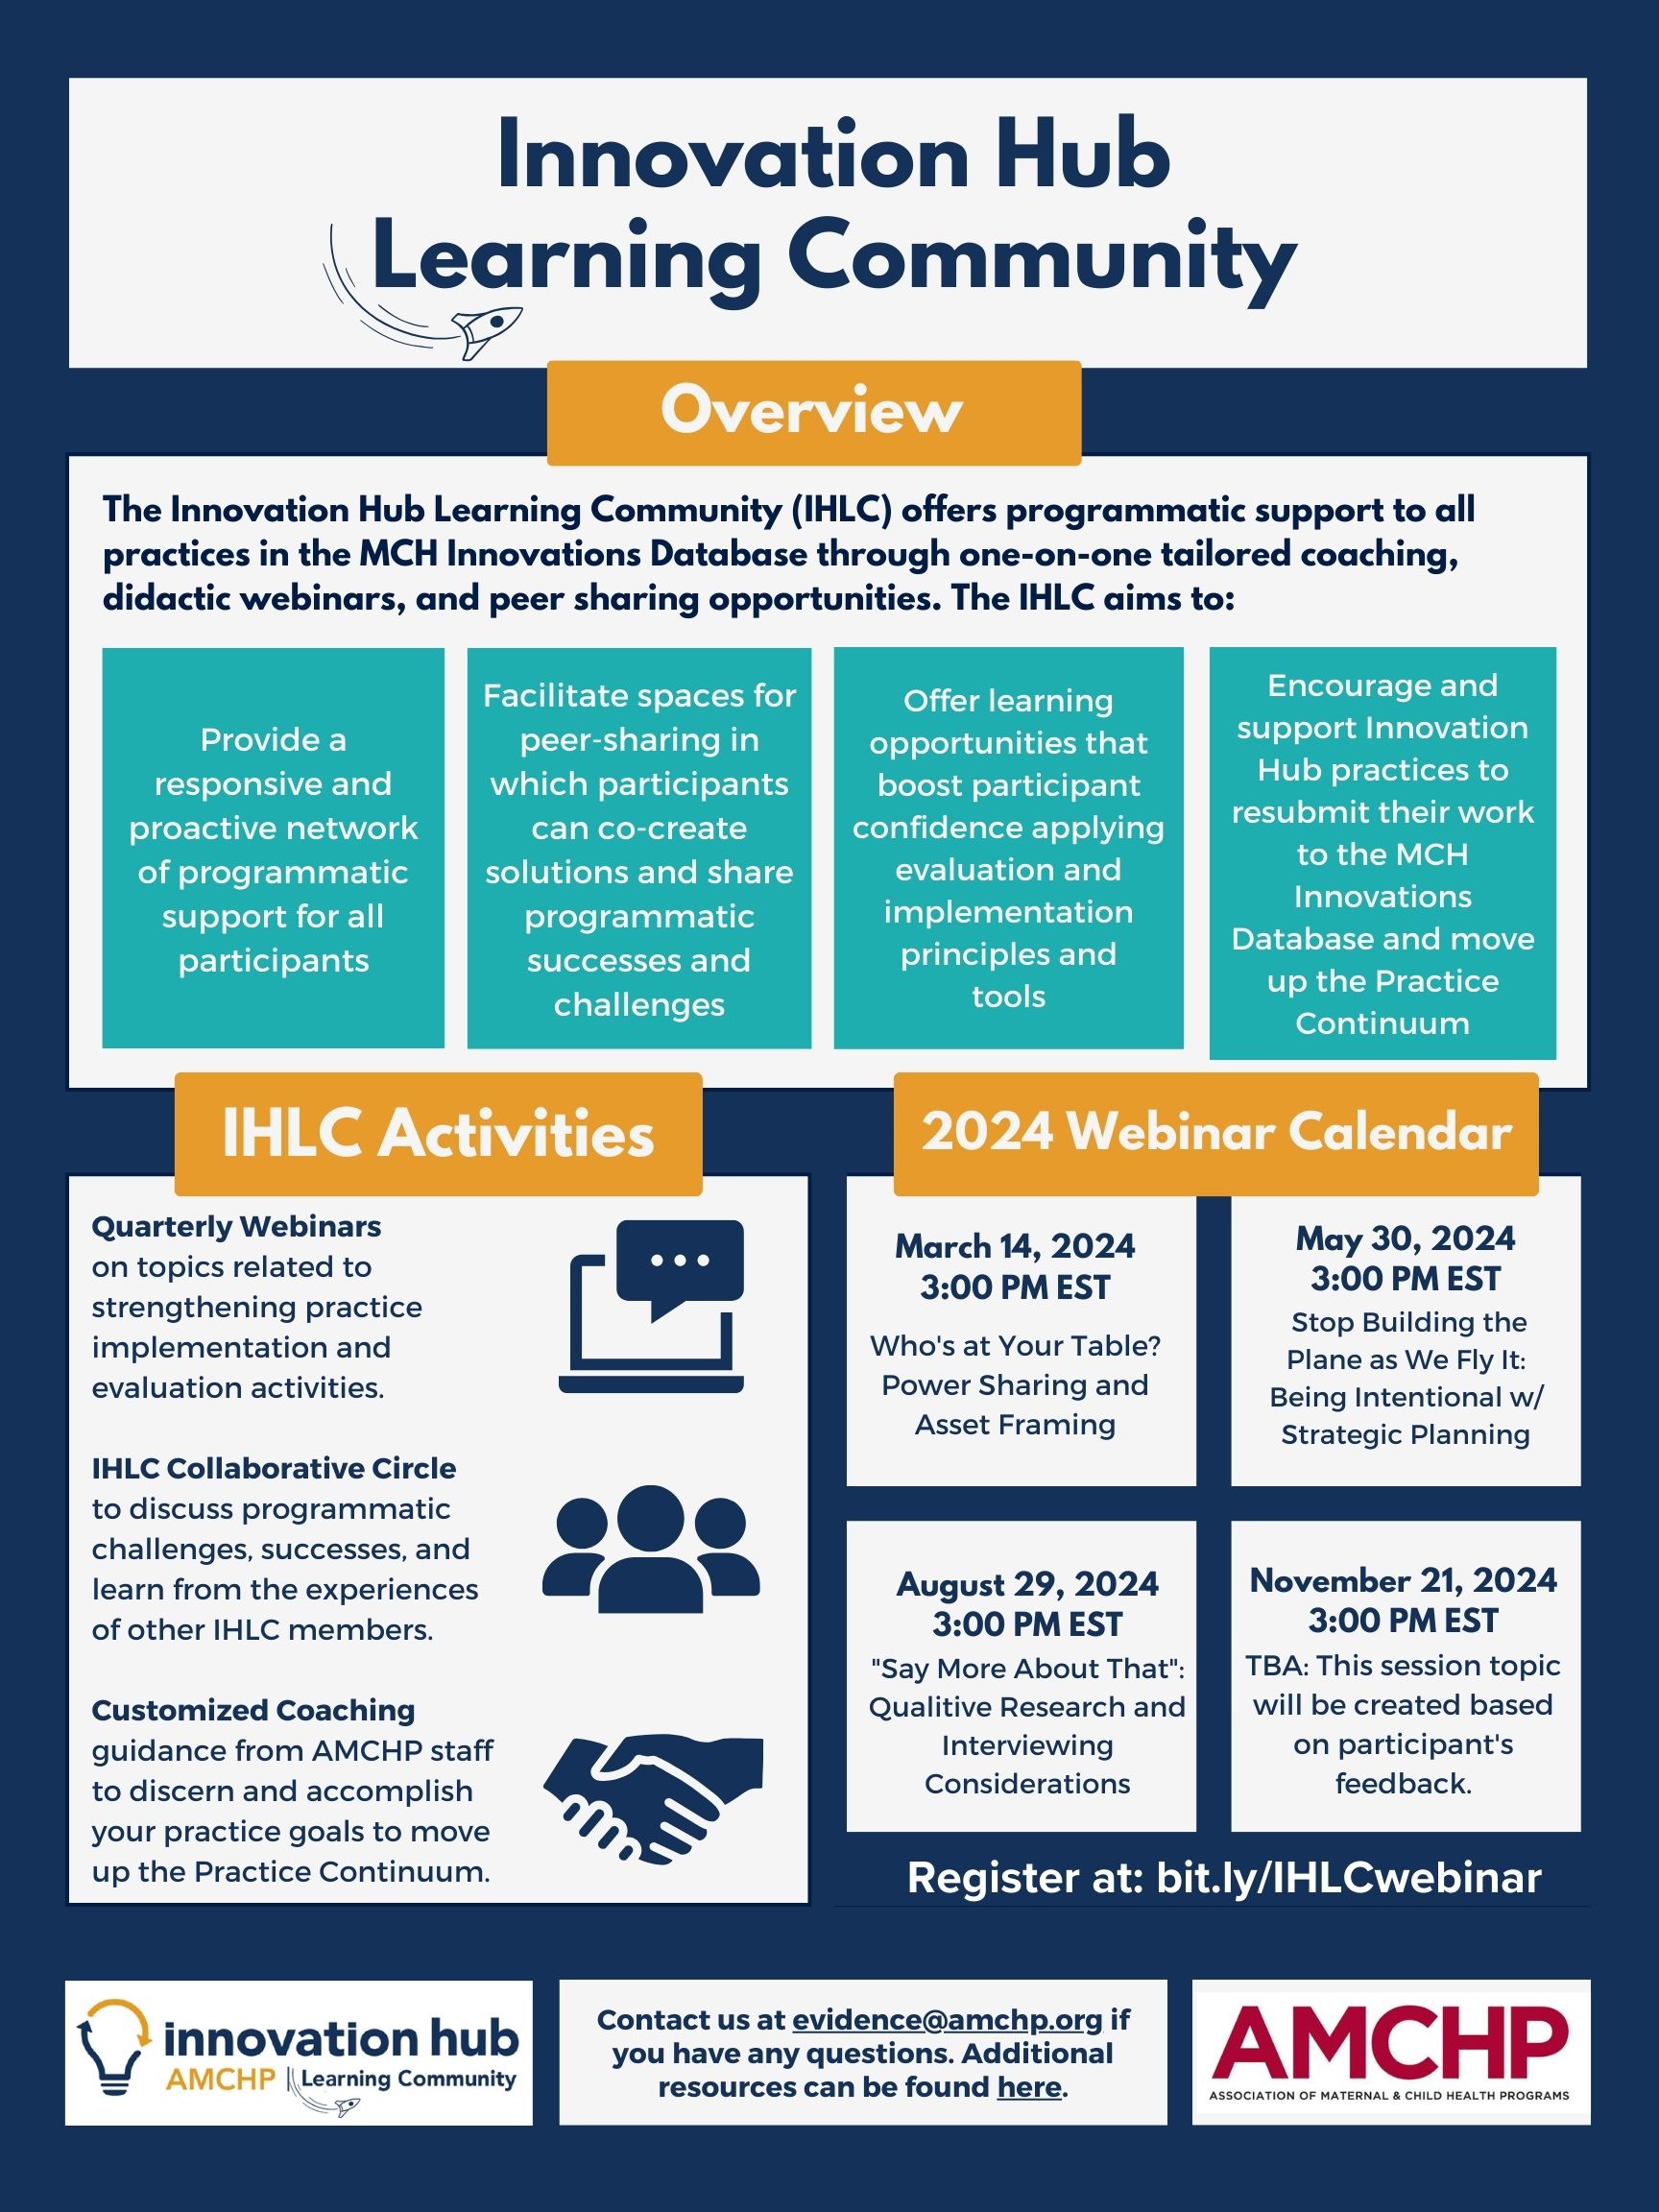 Flyer about the Innovation Hub Learning Community (IHLC) Upcoming webinars: March 14, 3:00 PM ET, Who's at Your Table? Power Sharing and Asset Framing; May 30 3:00 PM ET, Stop Building the Plane as We Fly It: Being Intentional w/ Strategic Planning; August 29, 3:00 PM ET, "Say More About That": Qualitative Research and Interviewing Considerations; November 21, 3:00 PM ET, Topic TBA: This session topic will be created based on participant's feedback.